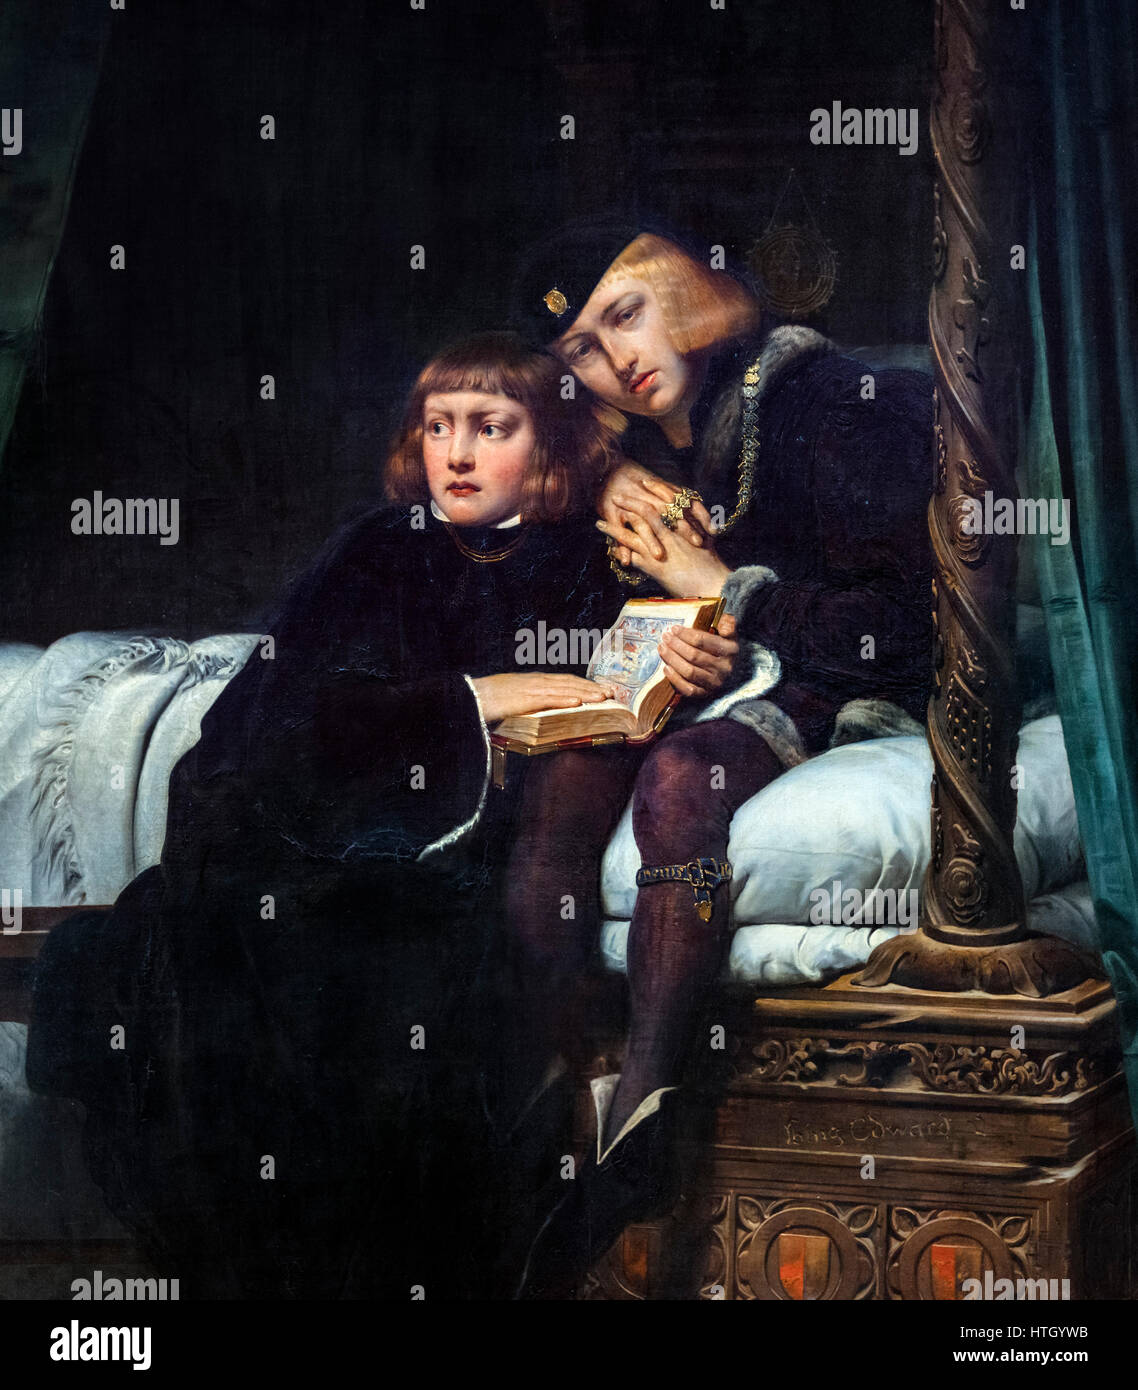 The Two Princes in the Tower. King Edward V and Richard, Duke of York, in the Tower of London by Paul Delaroche, oil on canvas, 1830. Detail of a larger painting, HTGYW8. Stock Photo